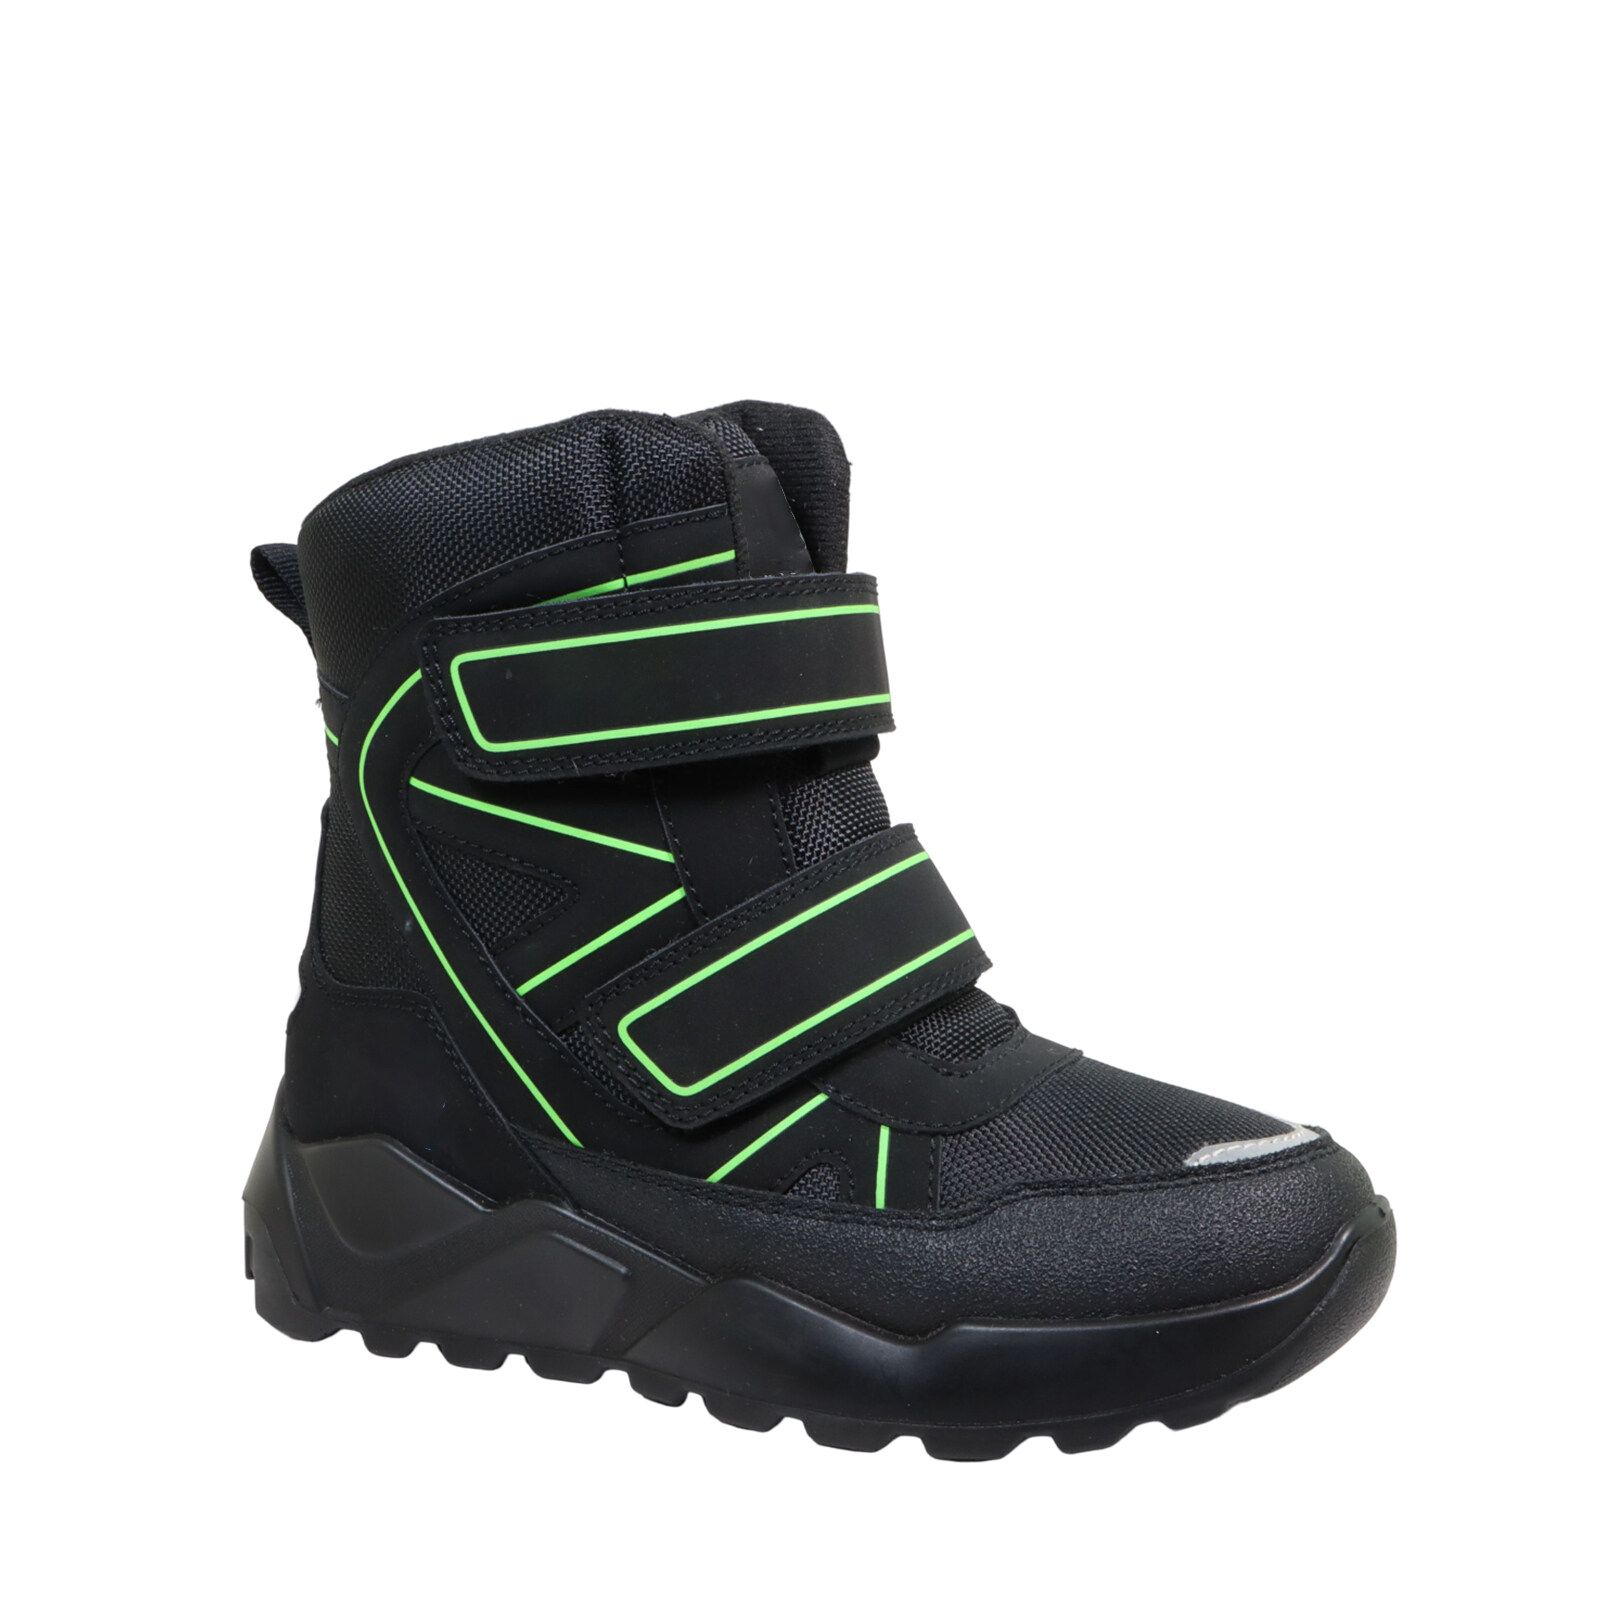 Eco-friendly Material Winter Velcro Boots for Girls